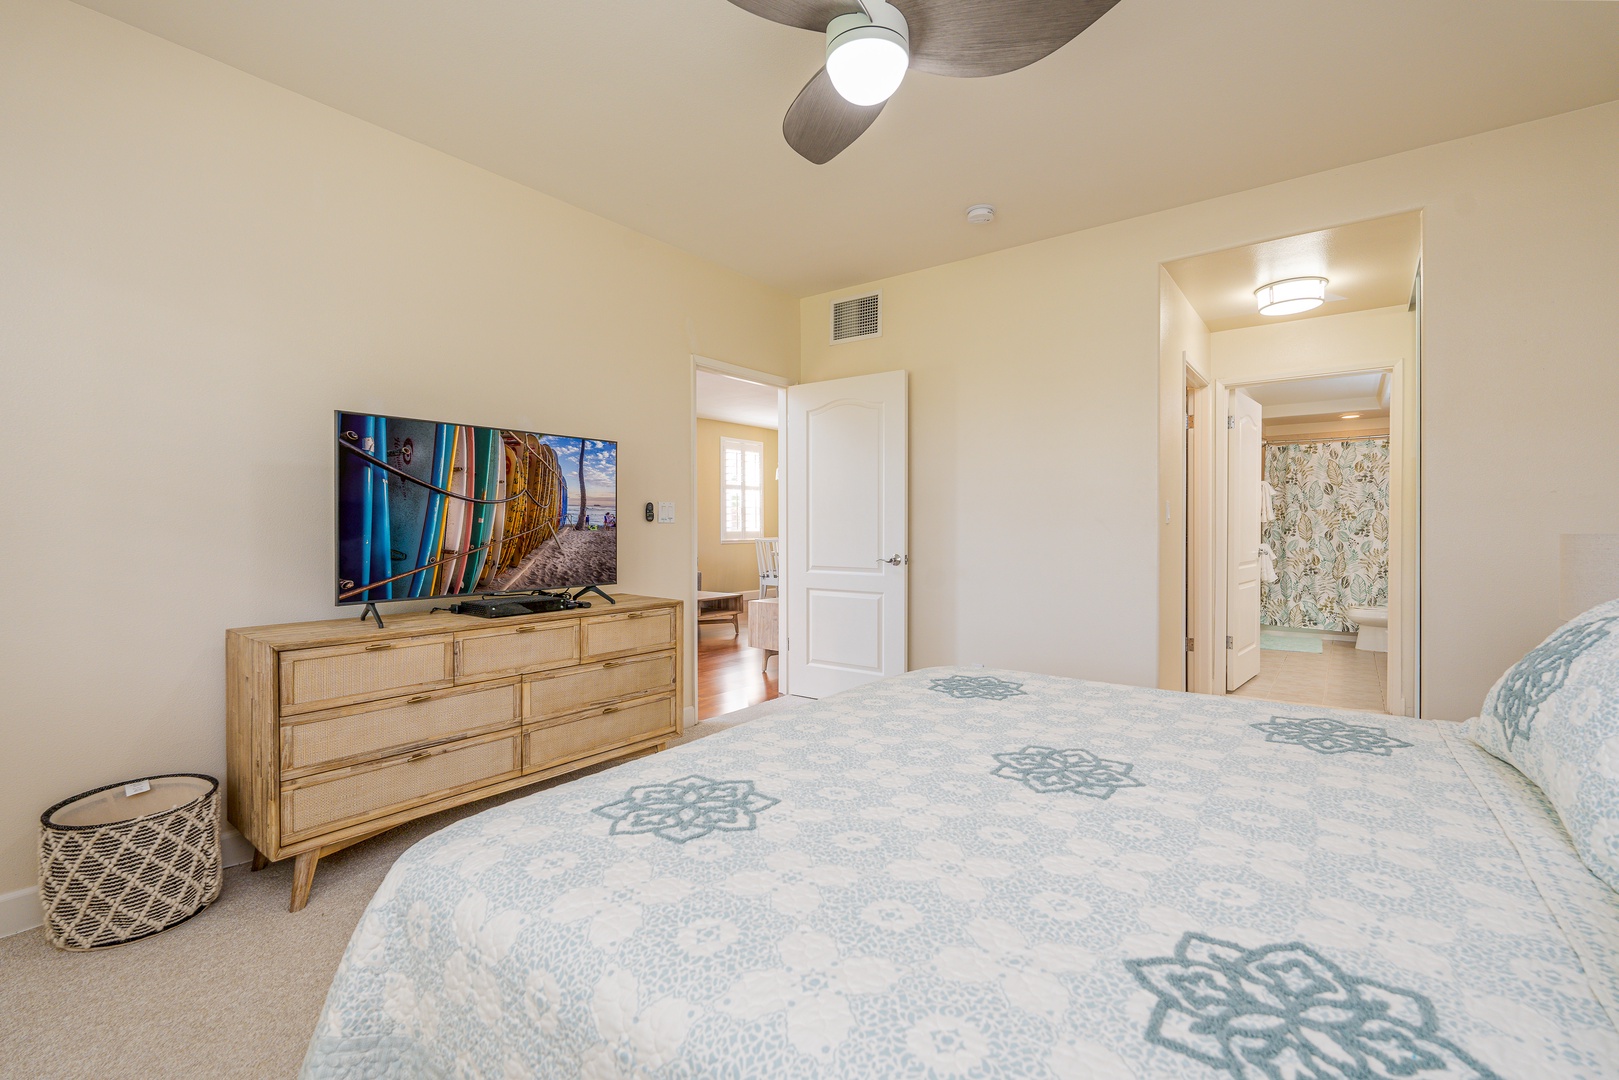 Kapolei Vacation Rentals, Ko Olina Kai 1105F - The primary suite comes with a dresser, TV and ensuite bathroom.